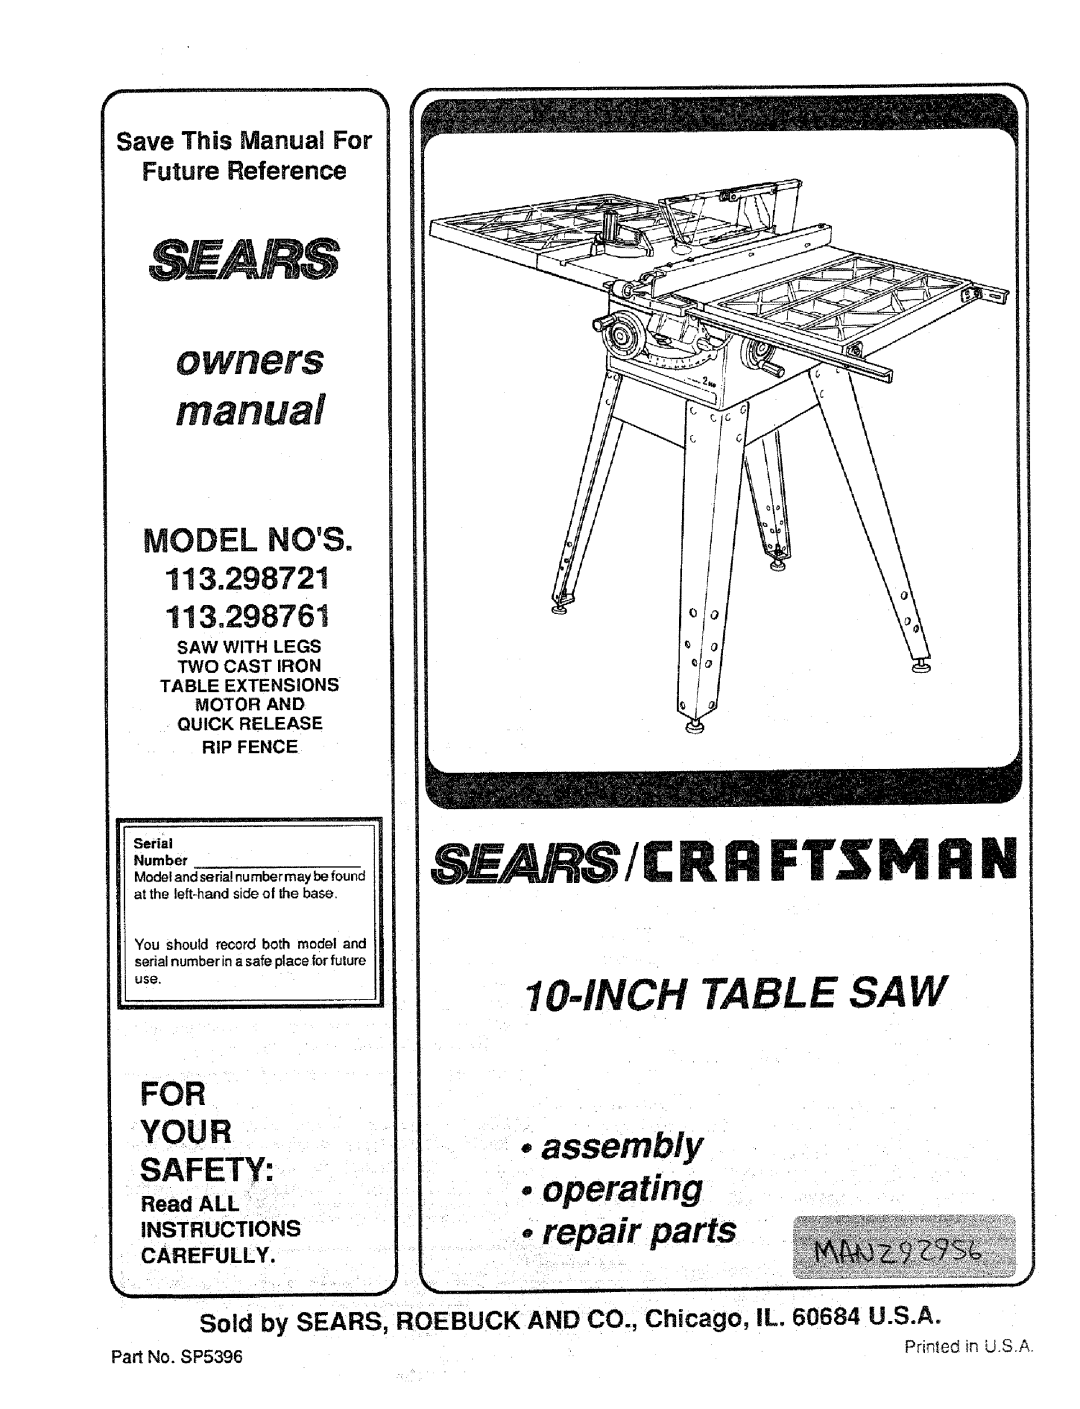 Craftsman 113.298721, 113.298761 manual OWBeTS, Model Nos, 113,298721 113.298761, Your, Read ALL, Instructions Carefully 